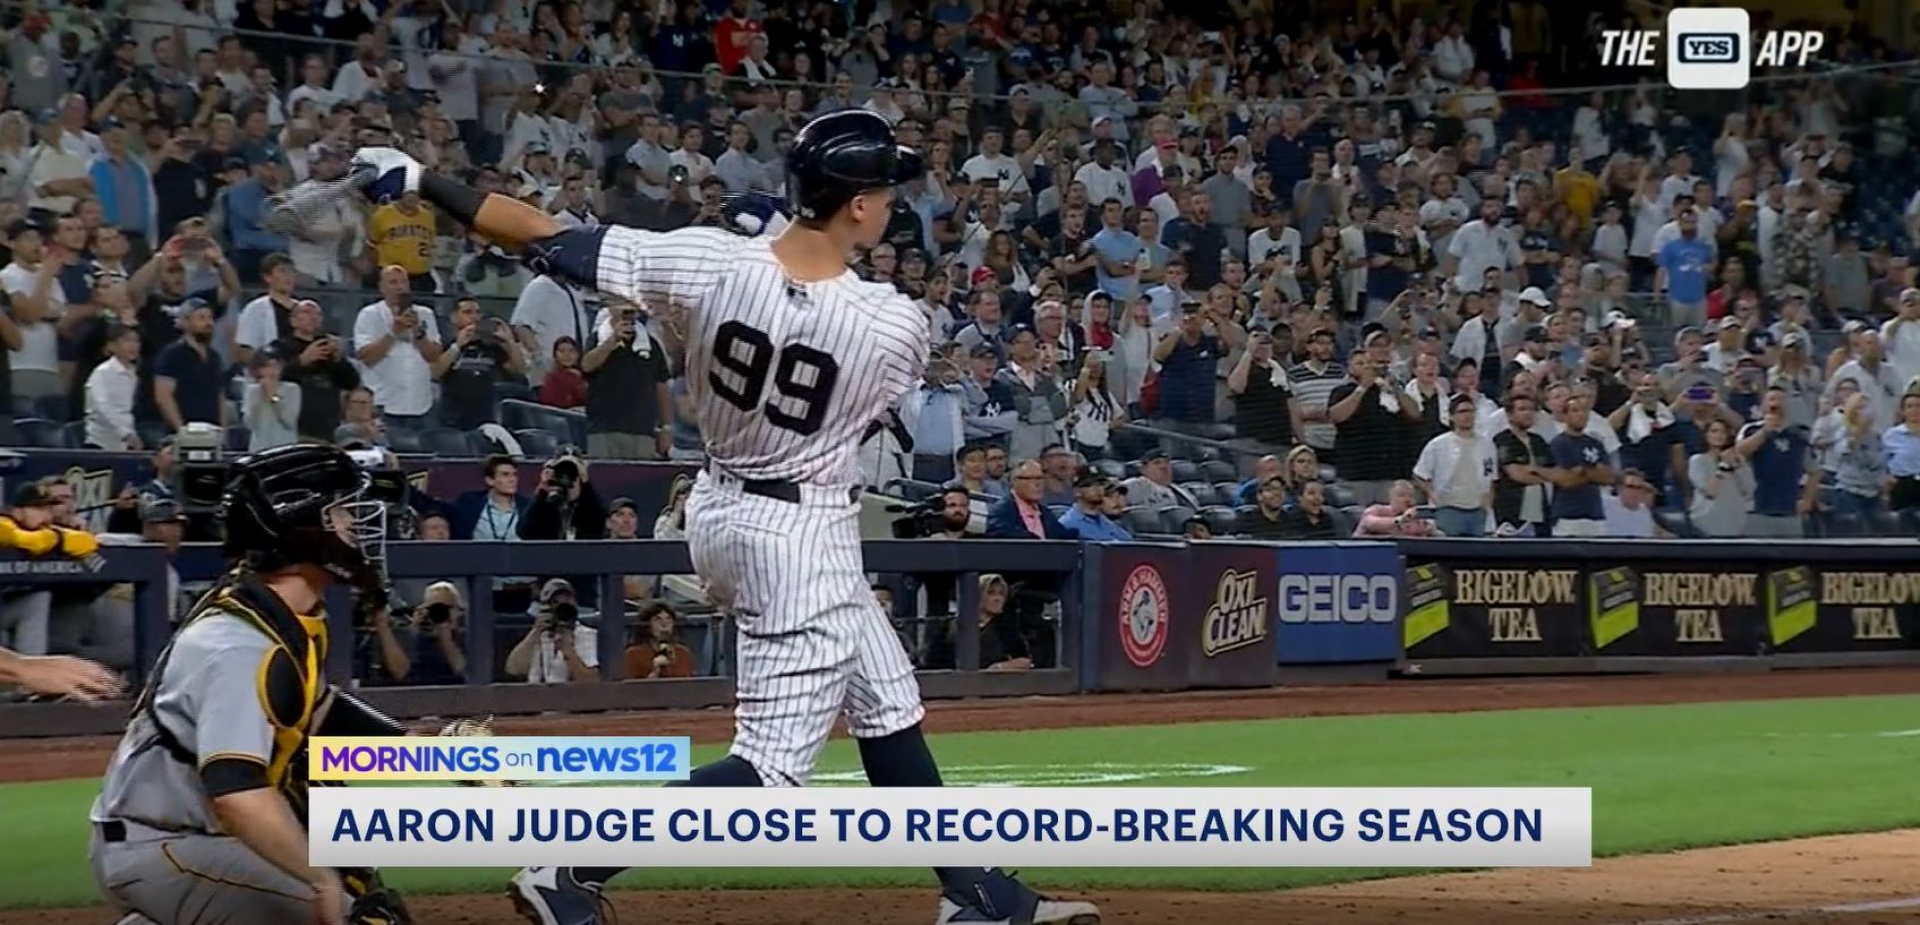 Aaron Judge Hits 60th Home Run, Closes in on (Legitimate) Record